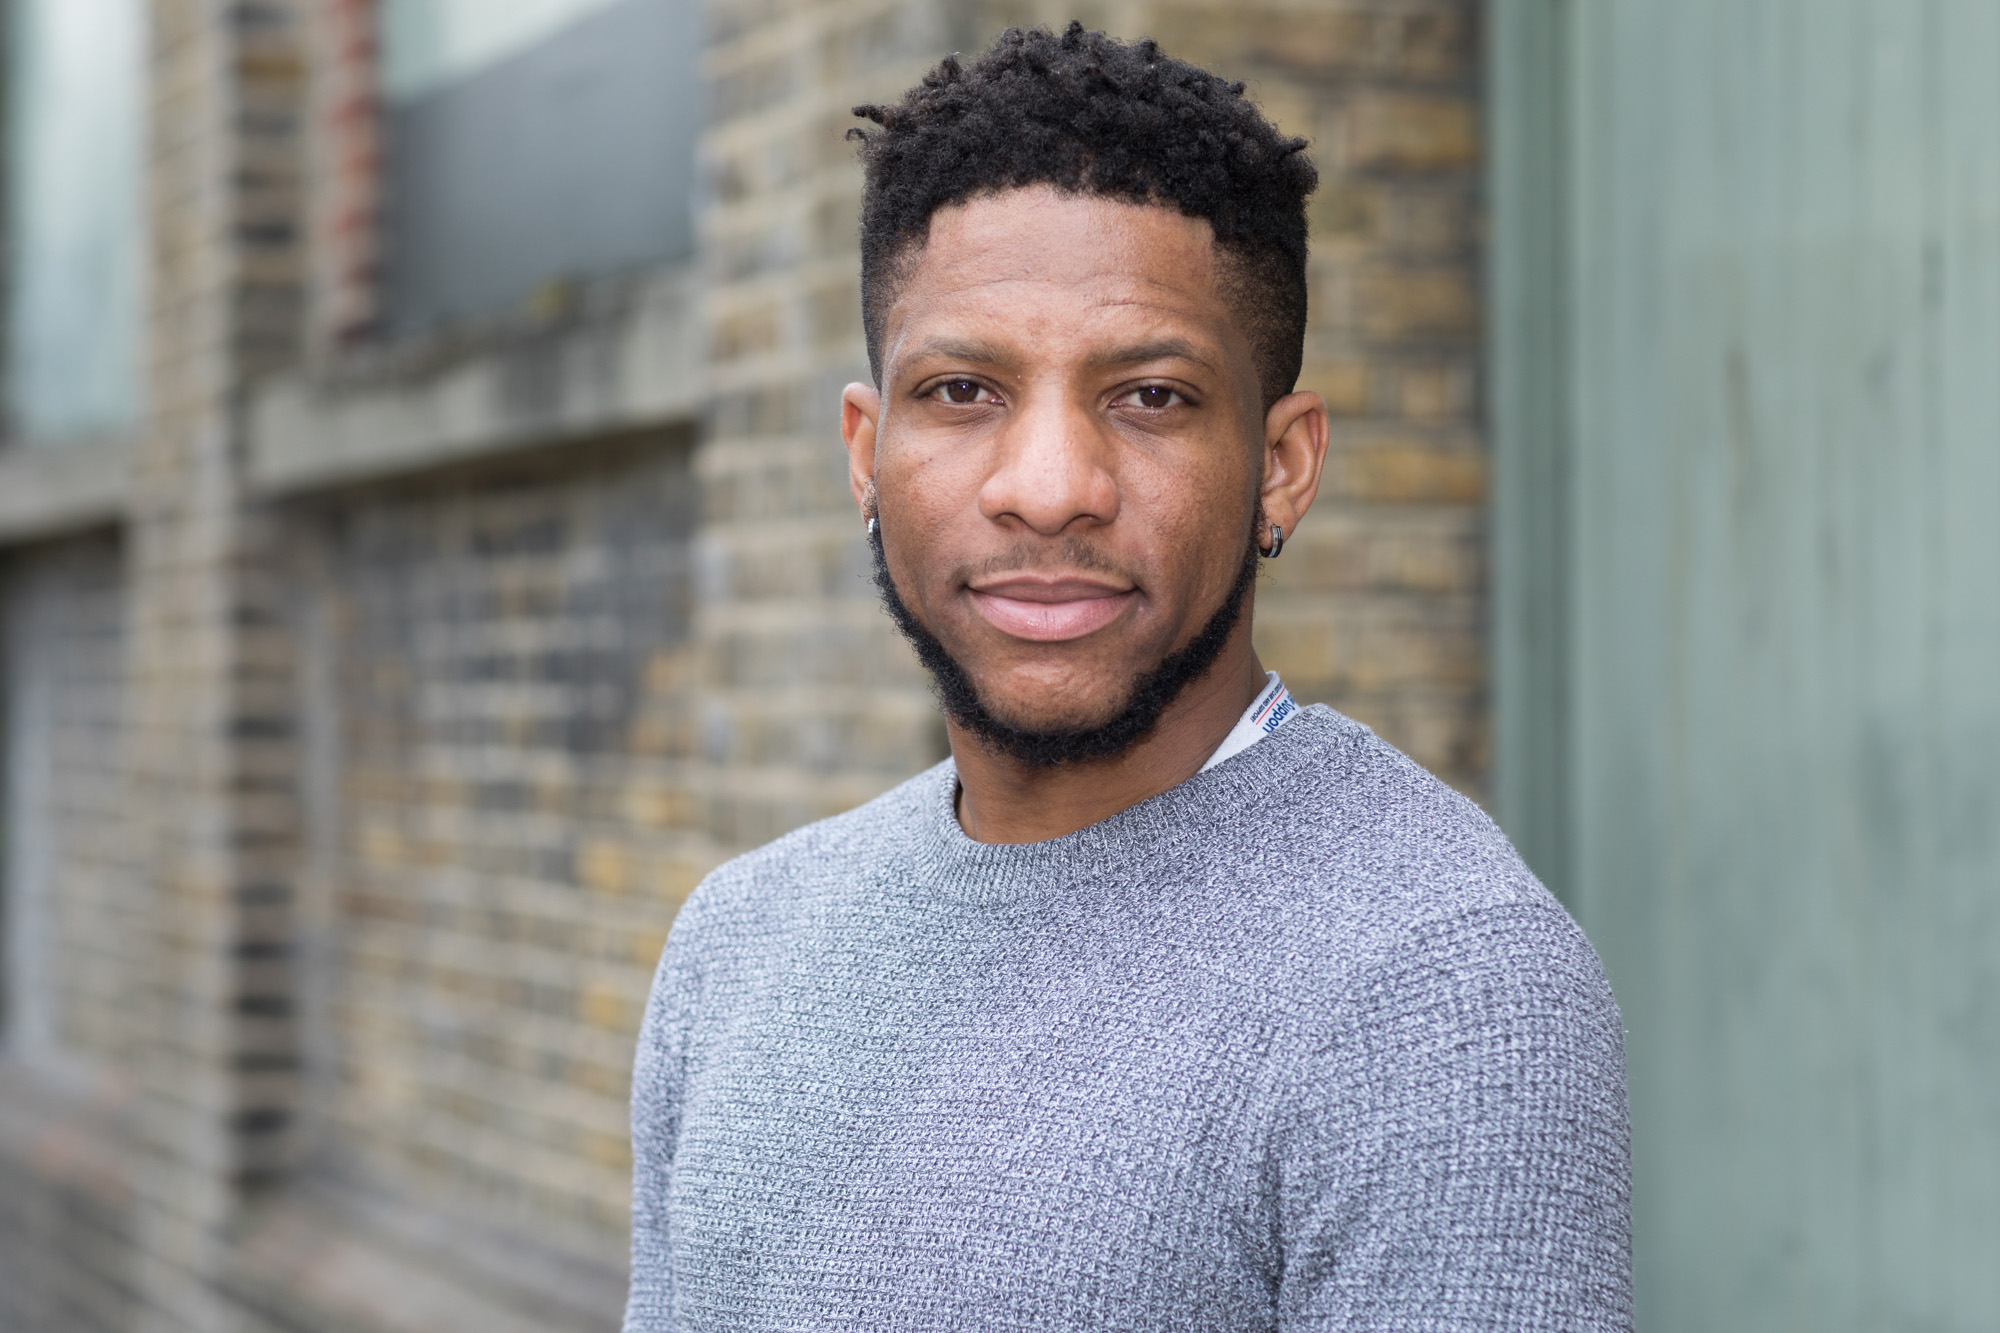 A man ina grey jumper stands in front of a brick wall in Croydon, South London. An example of relaxed headshot photography.